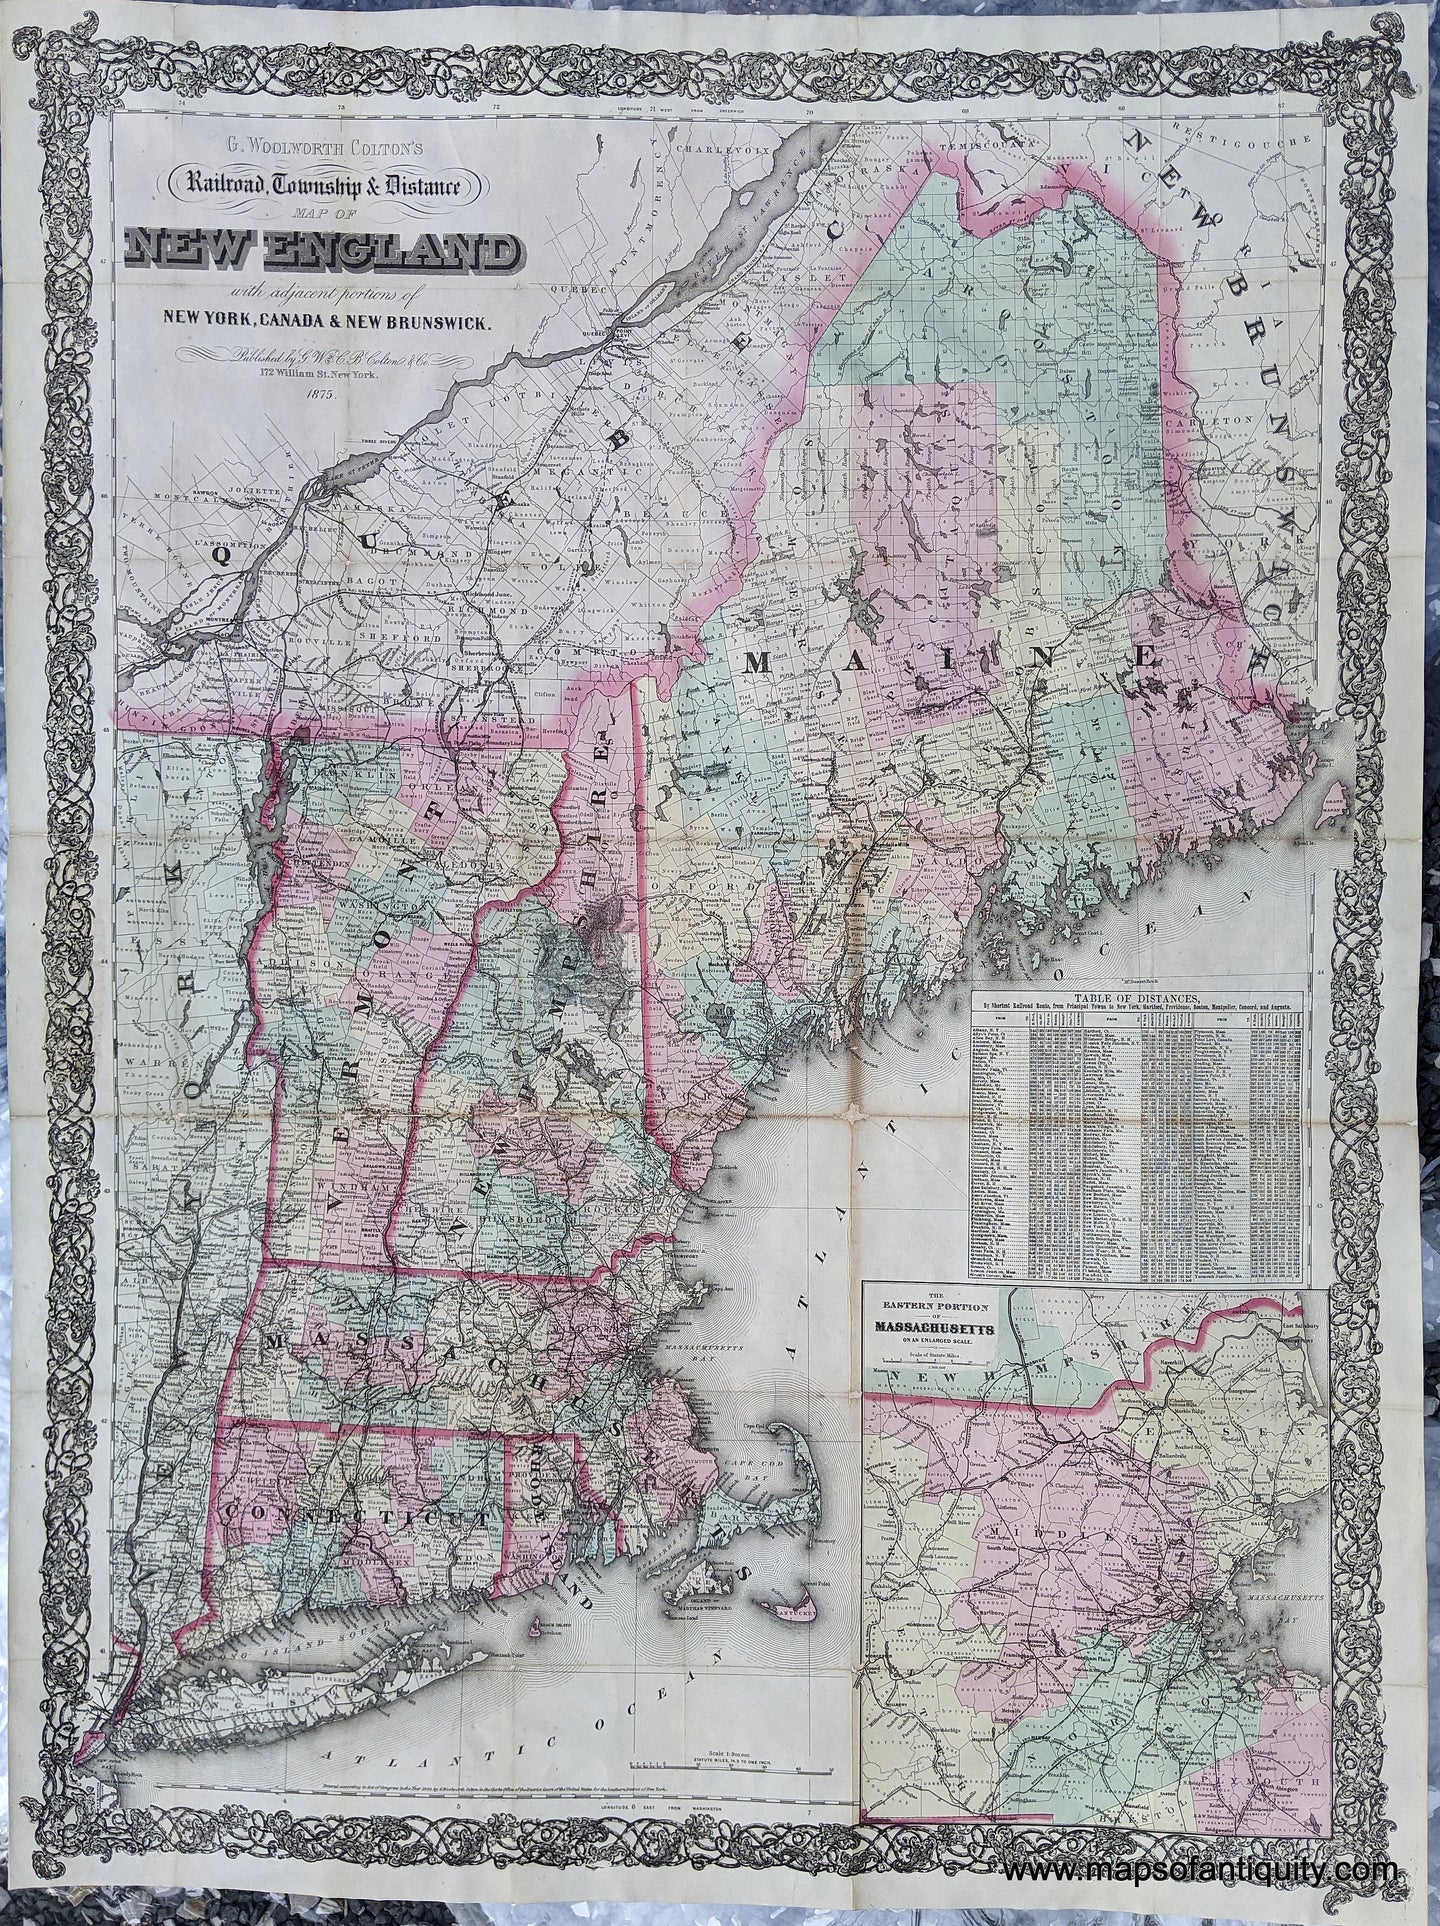 Genuine-Antique-Folding-Map-G.-Woolworth-Colton's-Railroad-Township-&-Distance-Map-of-New-England-with-adjacent-portions-of-New-York-Canada-&-New-Brunswick.-1875-G.W.-&-C.B.-Colton-Maps-Of-Antiquity